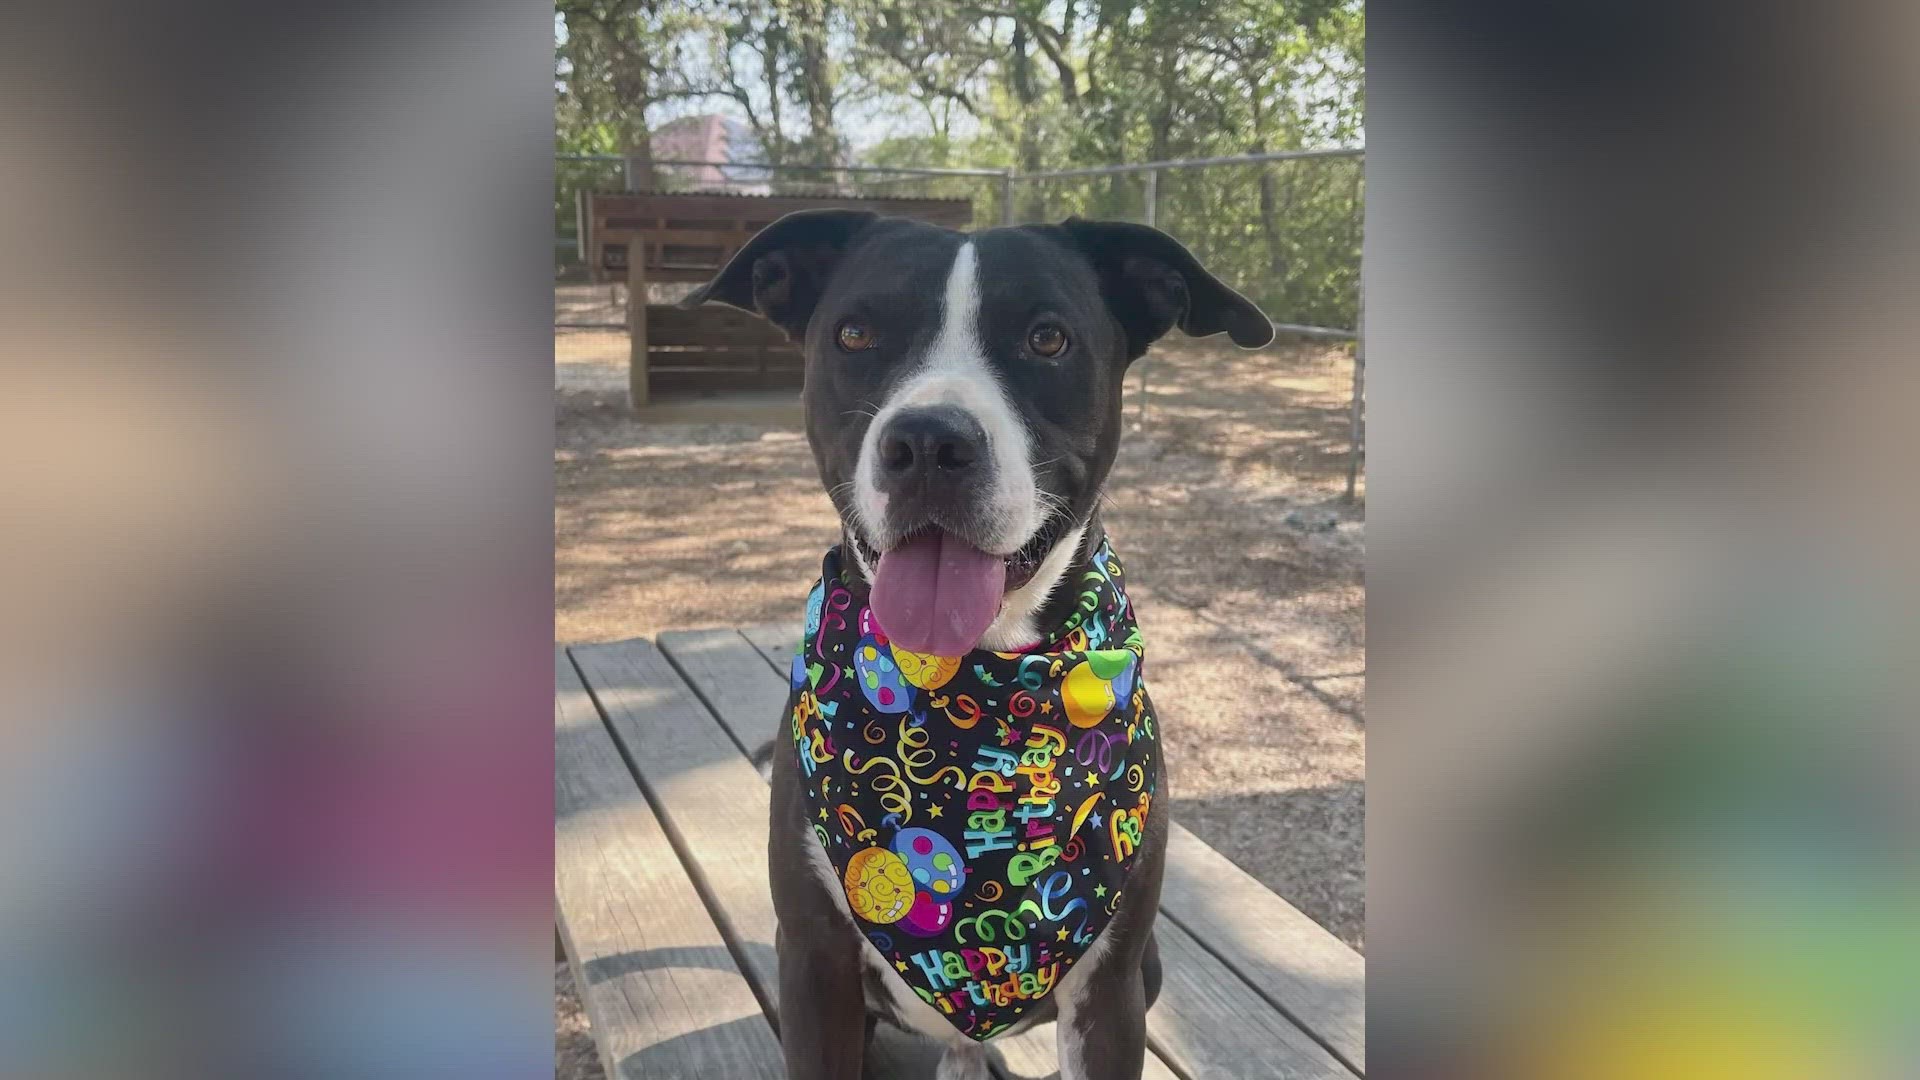 Staff said that little interest has been shown to the 3-year-old terrier mix, who keeps waiting patiently for someone to stop at his kennel door and choose him.